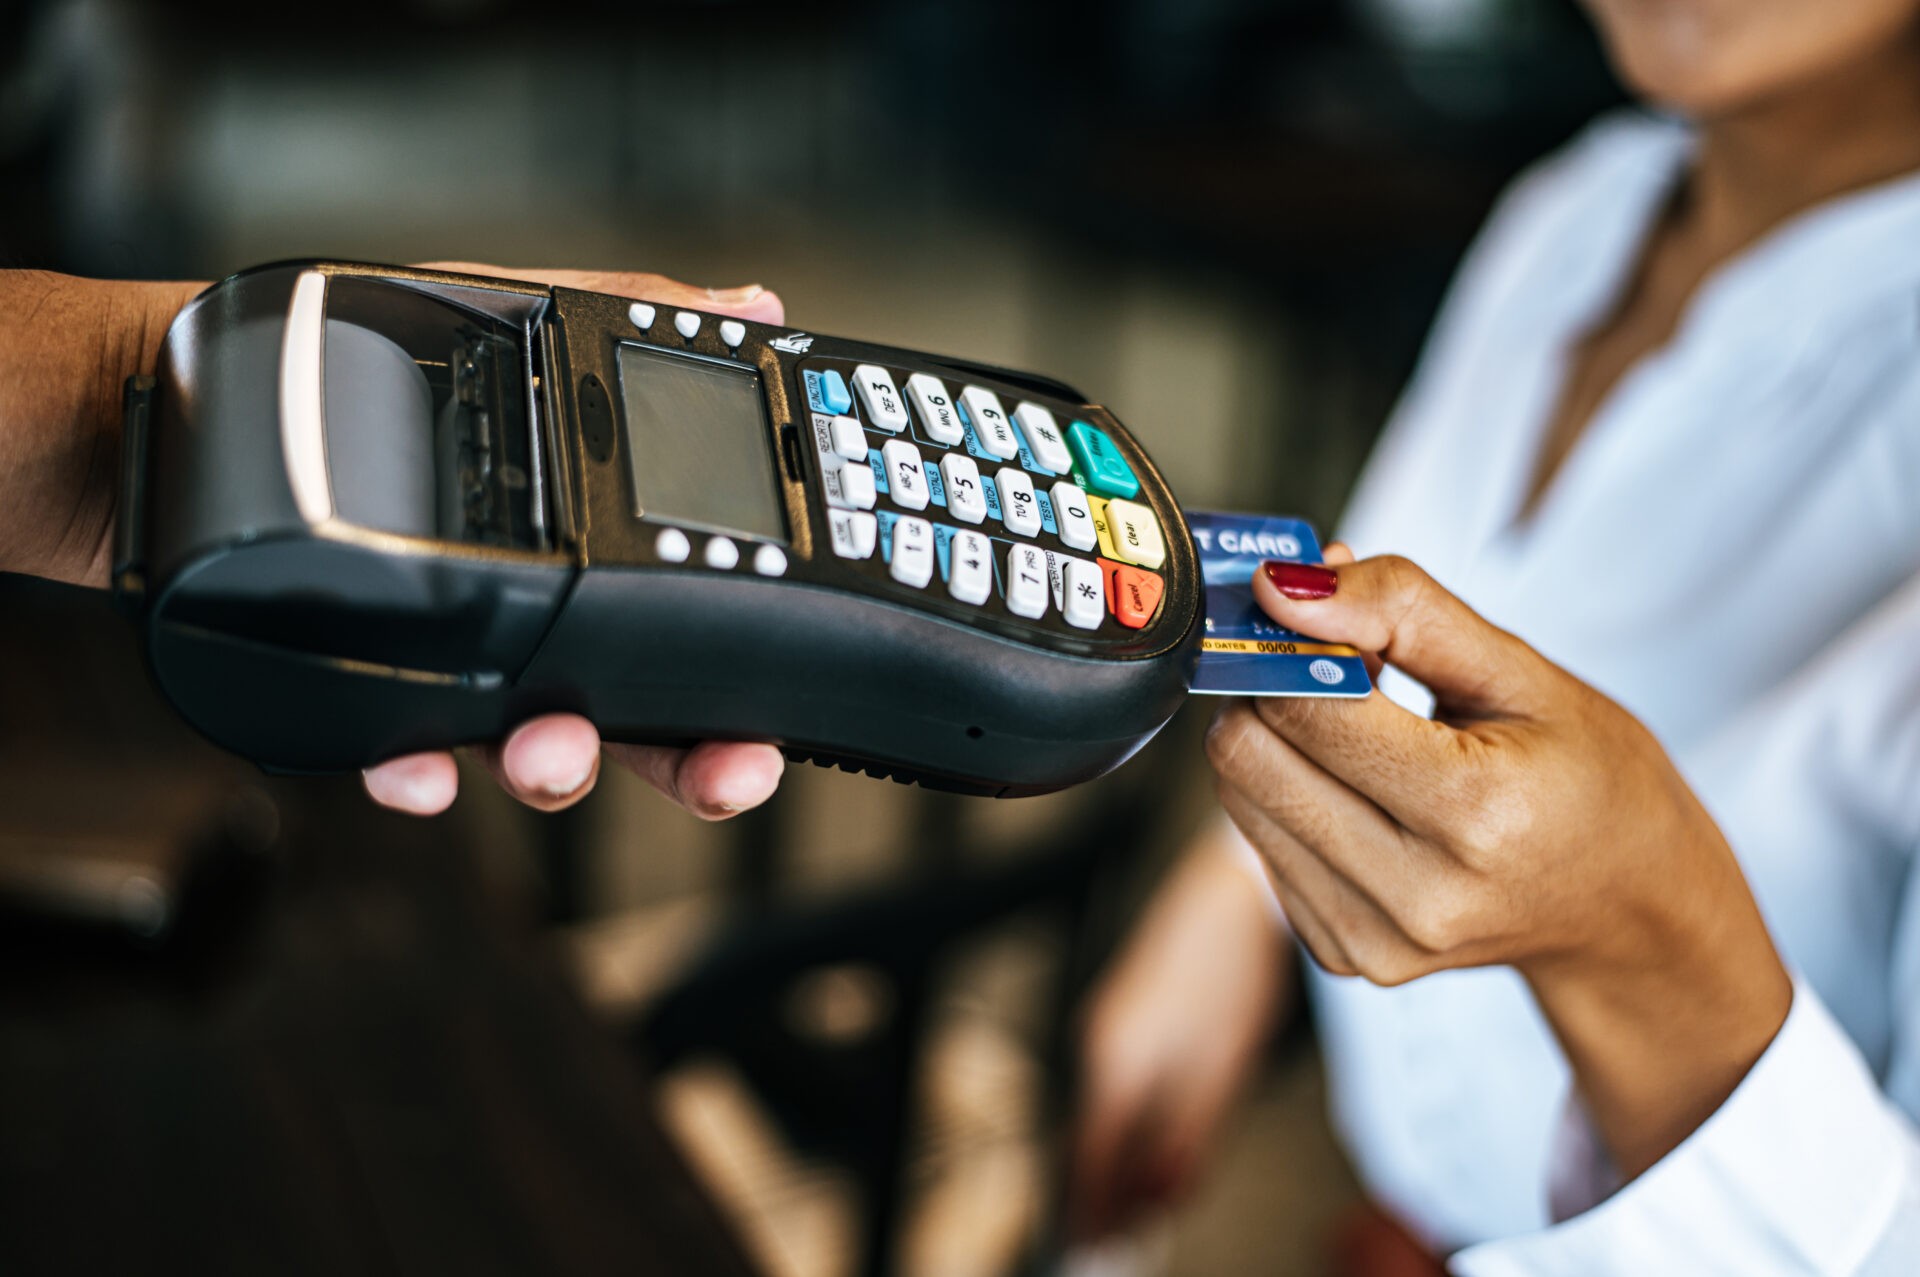 EMV level 3 certification is required for terminals to take smart card payments. We show how we do L3 certification faster.